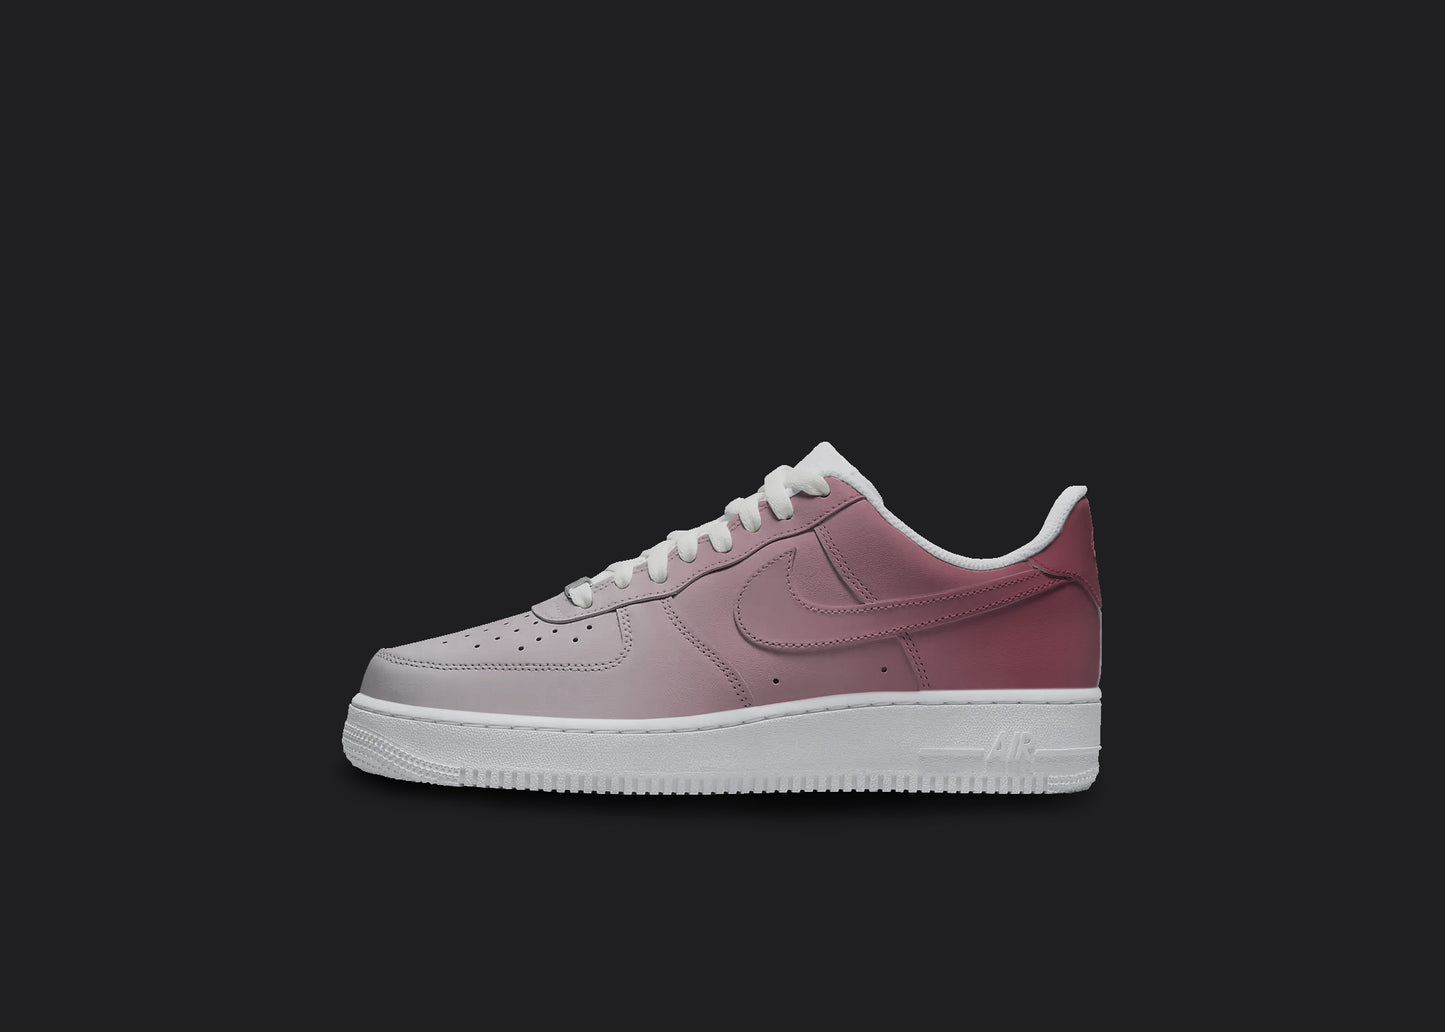 The image is of a Custom Nike Air force 1 sneaker on a blank black background. The white custom nike sneaker has a red fade covering most of it. 